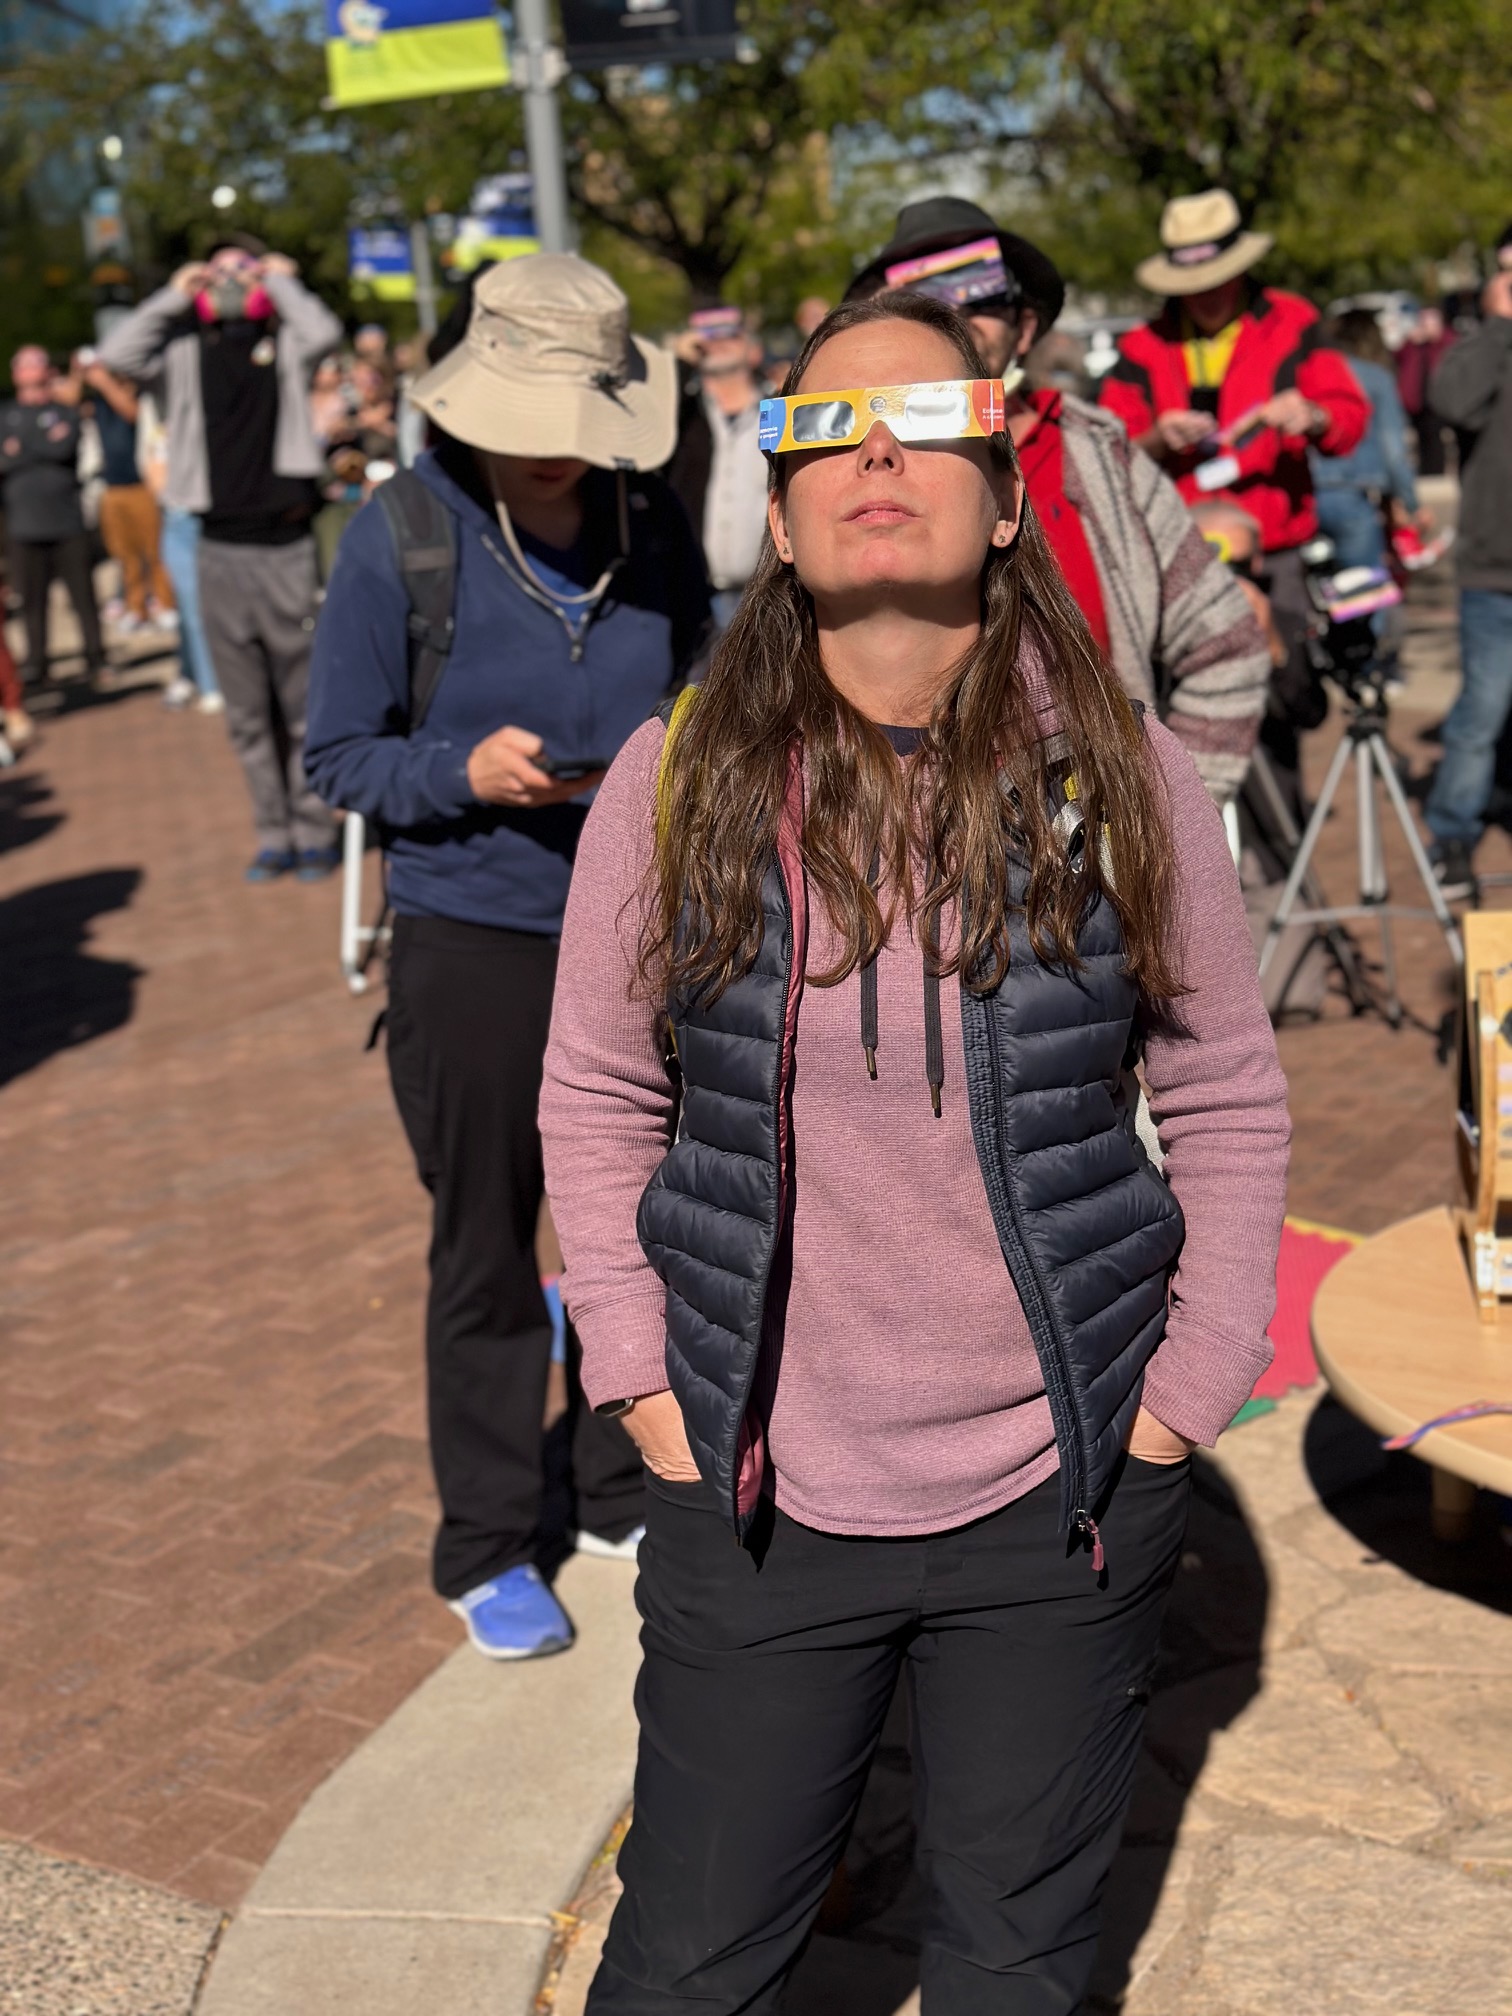 A woman standing with eclipse glases on. She is wearing black pants, a purple long sleeve shirt with a blue puffer vest. She has long brown hair and her hand are in her pockets. She is looking up at the Sun during an event of the October 14, 2023 Annular Eclipse. There are many people in the background.